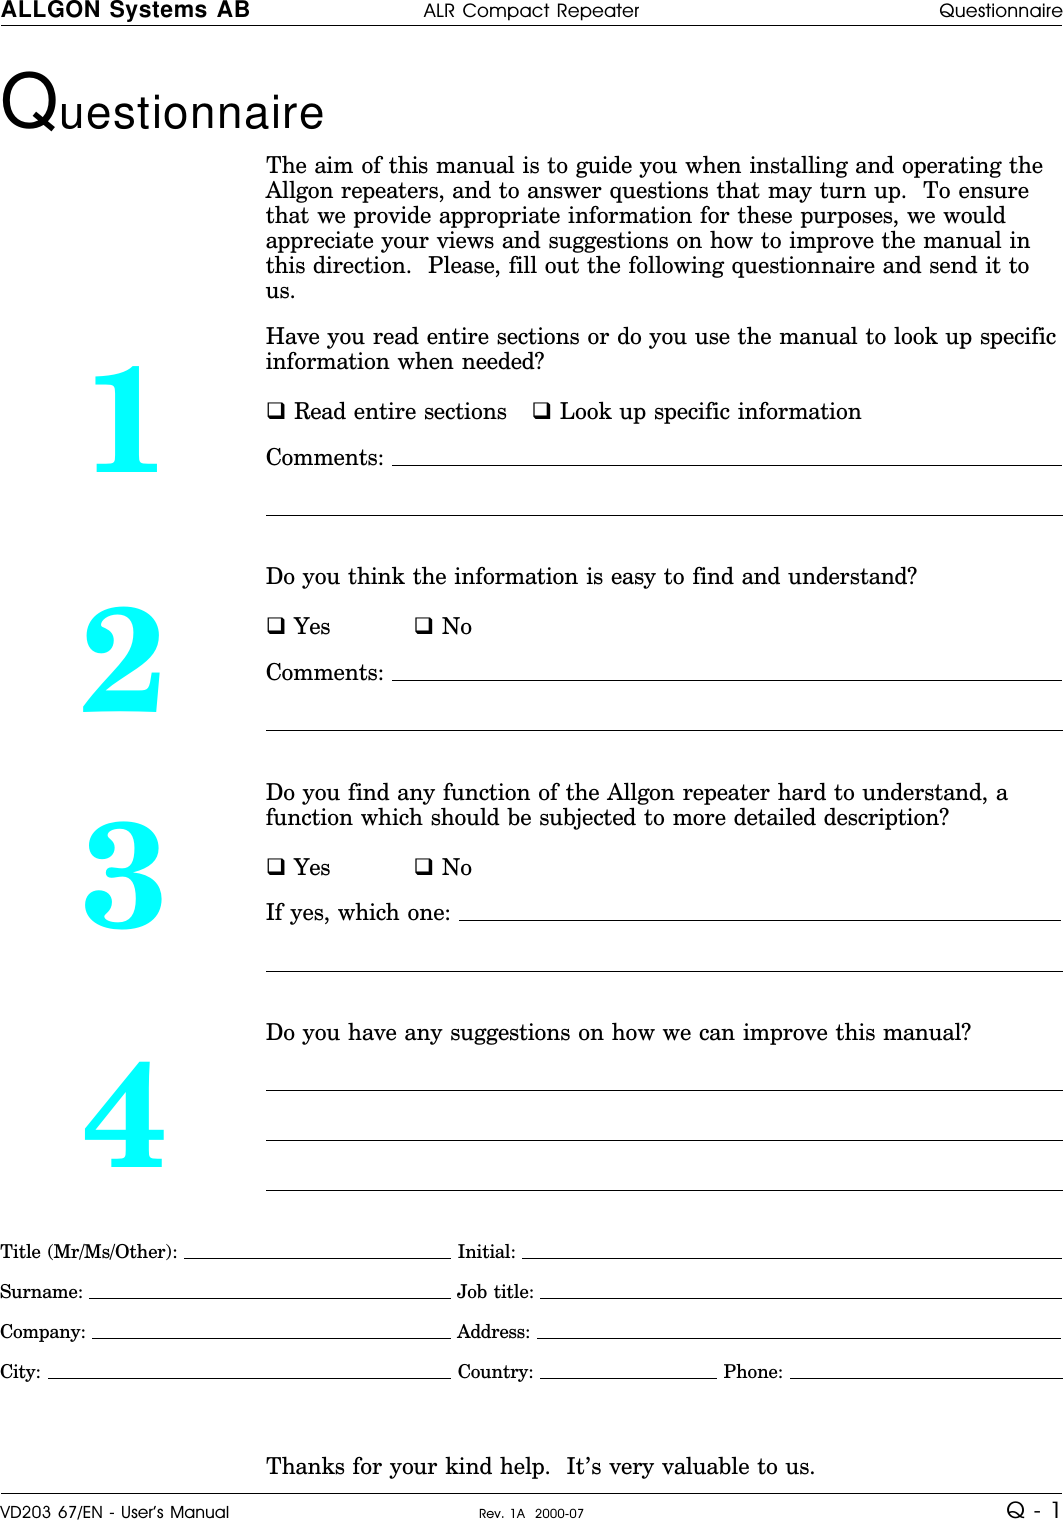 Questionnaire The aim of this manual is to guide you when installing and operating theAllgon repeaters, and to answer questions that may turn up.  To ensurethat we provide appropriate information for these purposes, we wouldappreciate your views and suggestions on how to improve the manual inthis direction.  Please, fill out the following questionnaire and send it tous.1Have you read entire sections or do you use the manual to look up specificinformation when needed?q Read entire sections q Look up specific informationComments: 2Do you think the information is easy to find and understand?q Yes q NoComments: 3Do you find any function of the Allgon repeater hard to understand, afunction which should be subjected to more detailed description?q Yes q NoIf yes, which one: 4Do you have any suggestions on how we can improve this manual?Title (Mr/Ms/Other):   Initial: Surname:  Job title: Company:  Address: City:   Country:   Phone: Thanks for your kind help.  It’s very valuable to us.ALLGON Systems AB ALR Compact Repeater QuestionnaireVD203 67/EN - User’s Manual Rev. 1A  2000-07 Q - 1